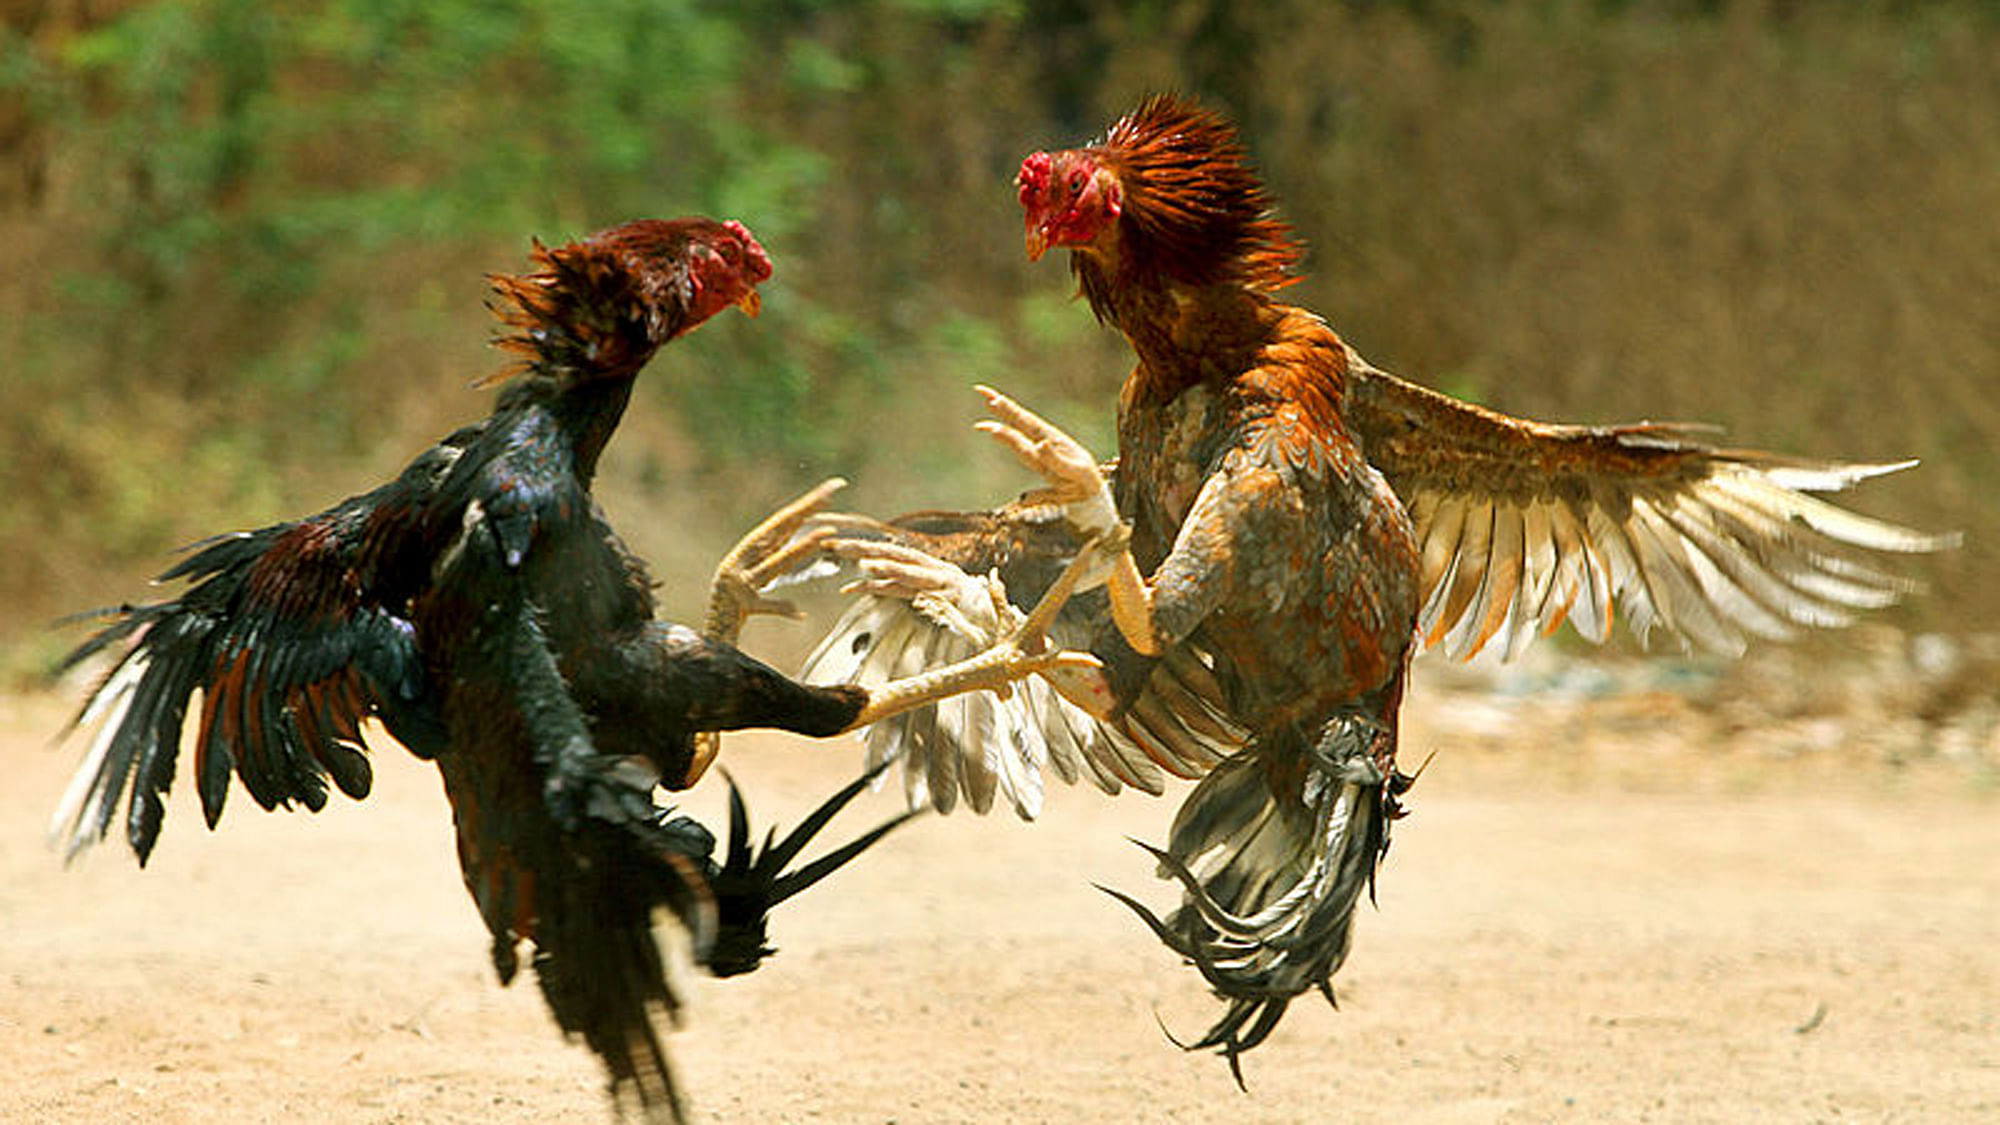 Andhra Pradesh is set for another season of ‘cockfighting’. (Photo Courtesy: The News Minute)